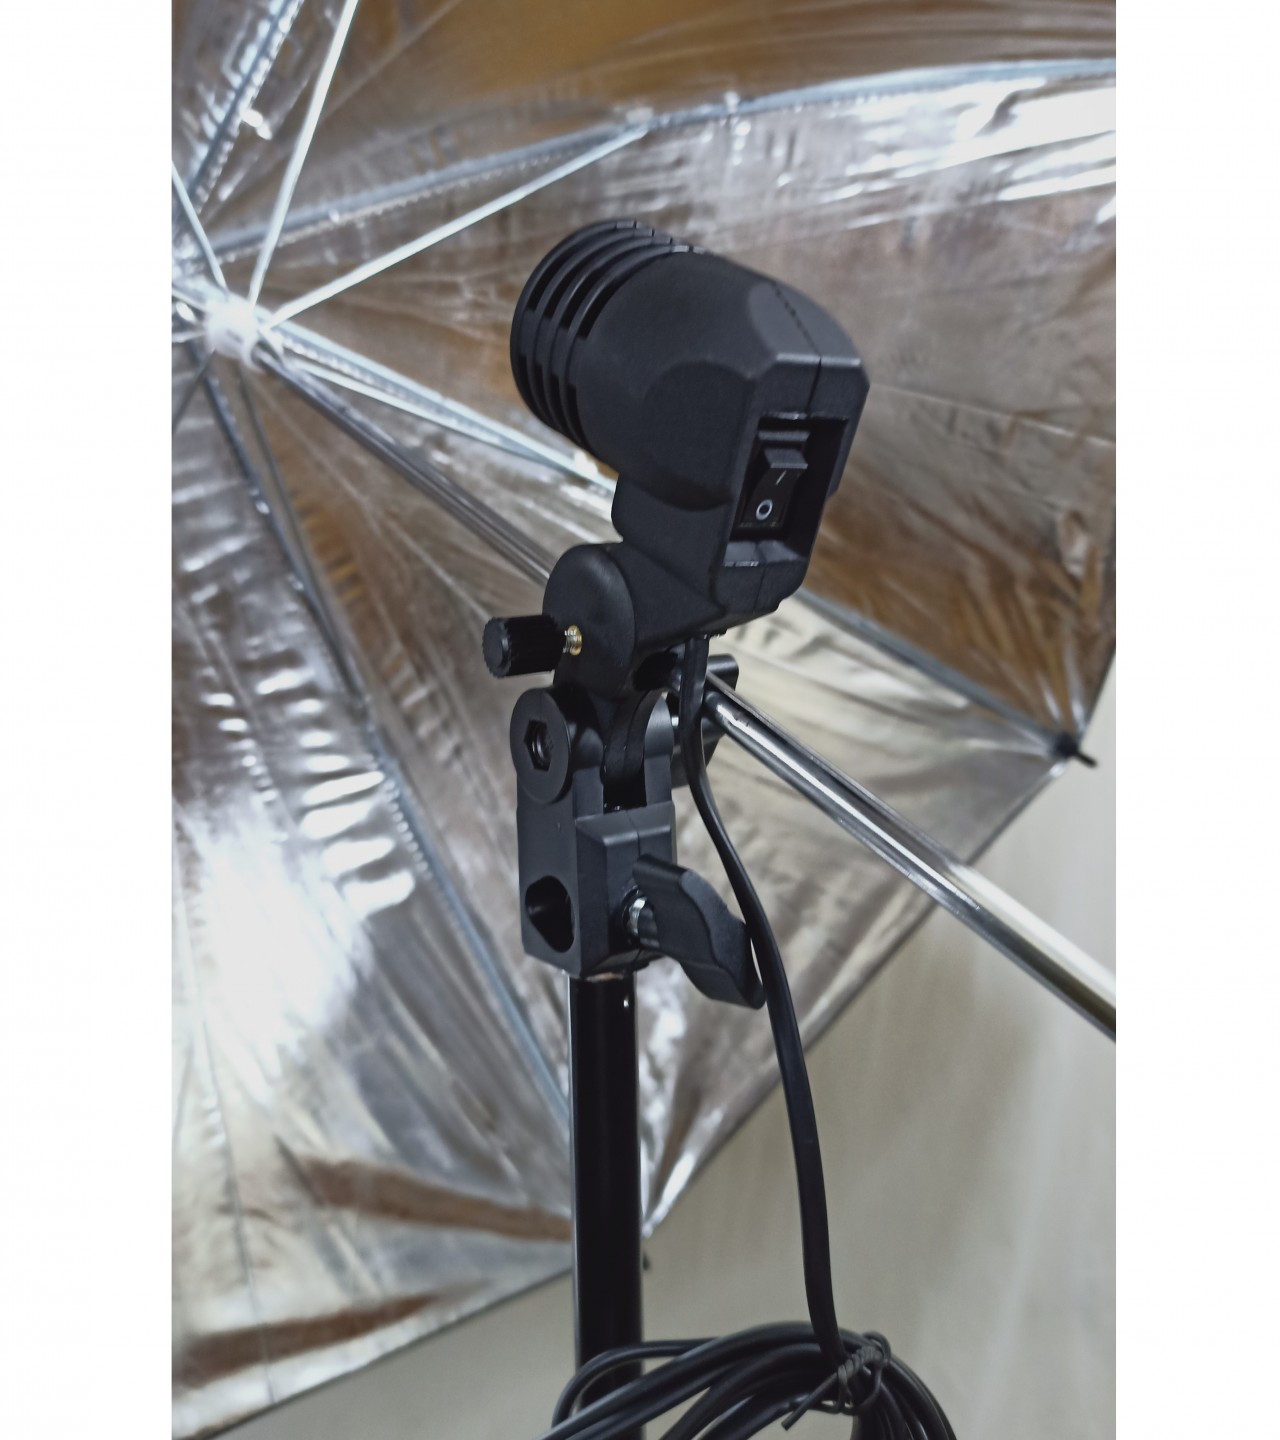 Black Reflective Umbrella continuous Lights setup pair for photography and video shooting